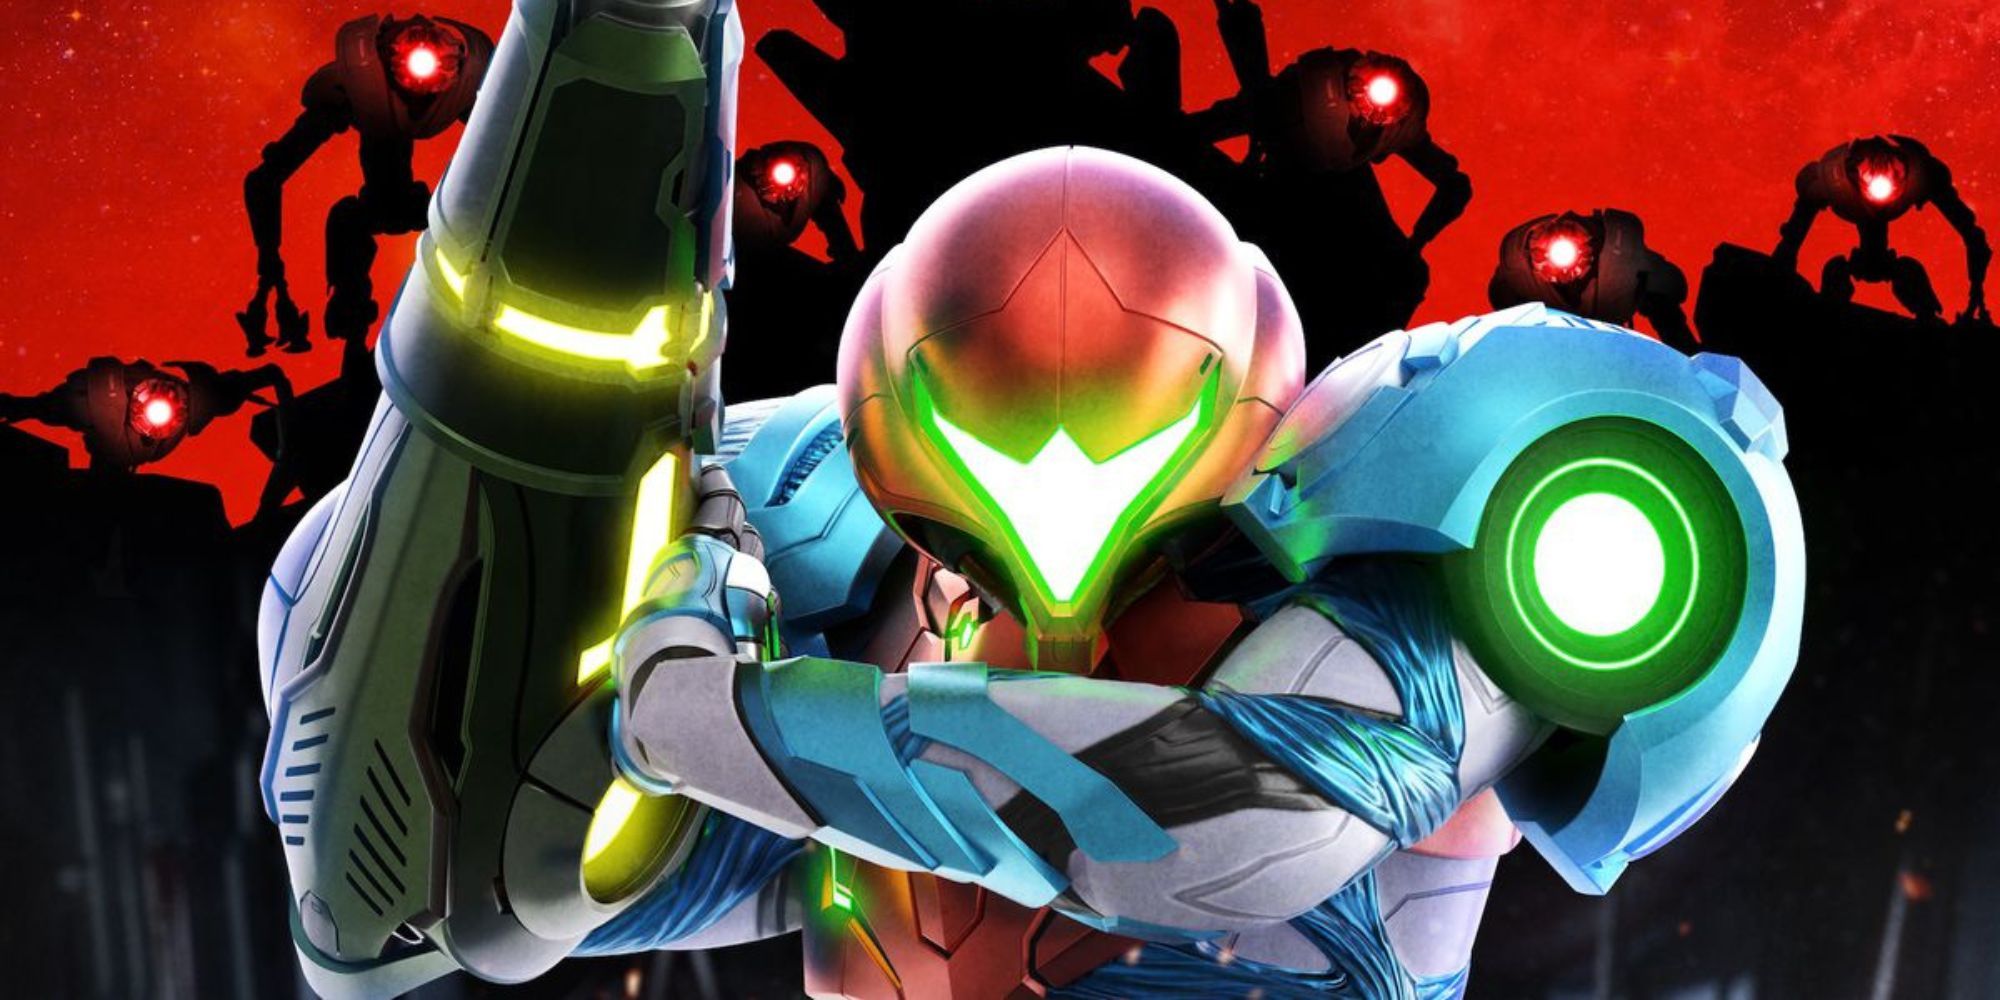 Samus stands in front of a group of E.M.M.I's